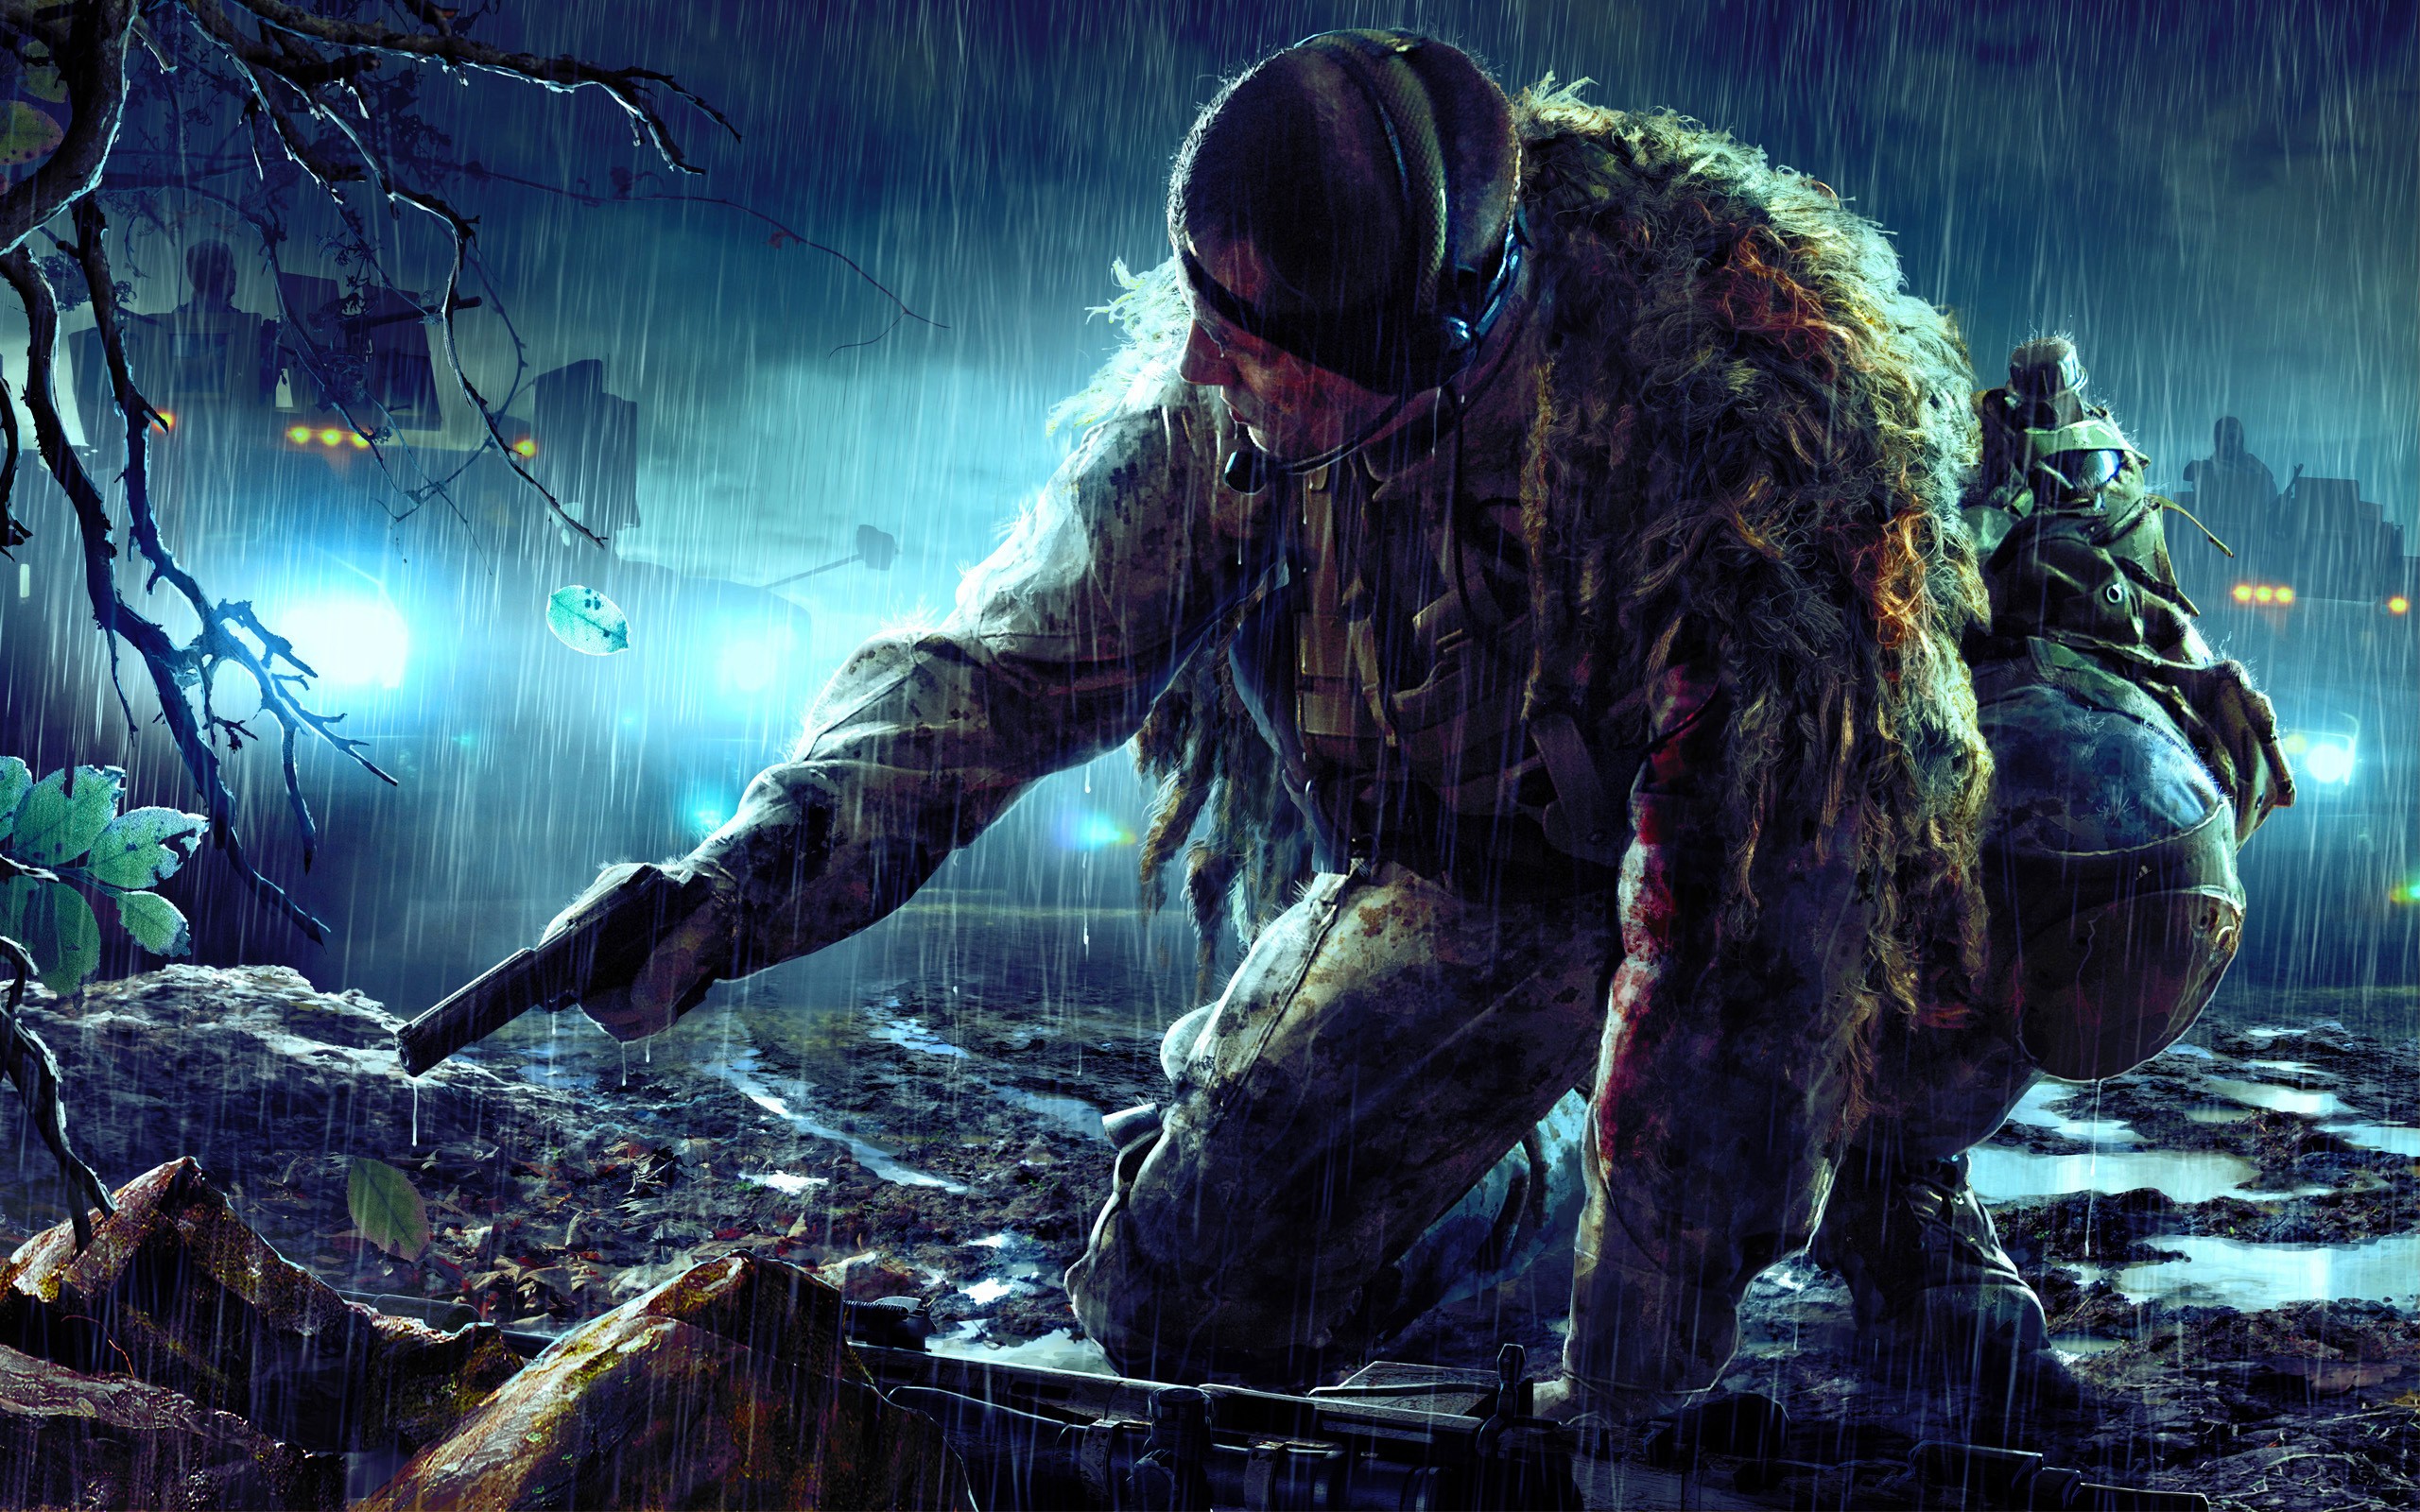 soldiers, Video, Games, Guns, Night, Cartoonish, Special, Forces Wallpaper